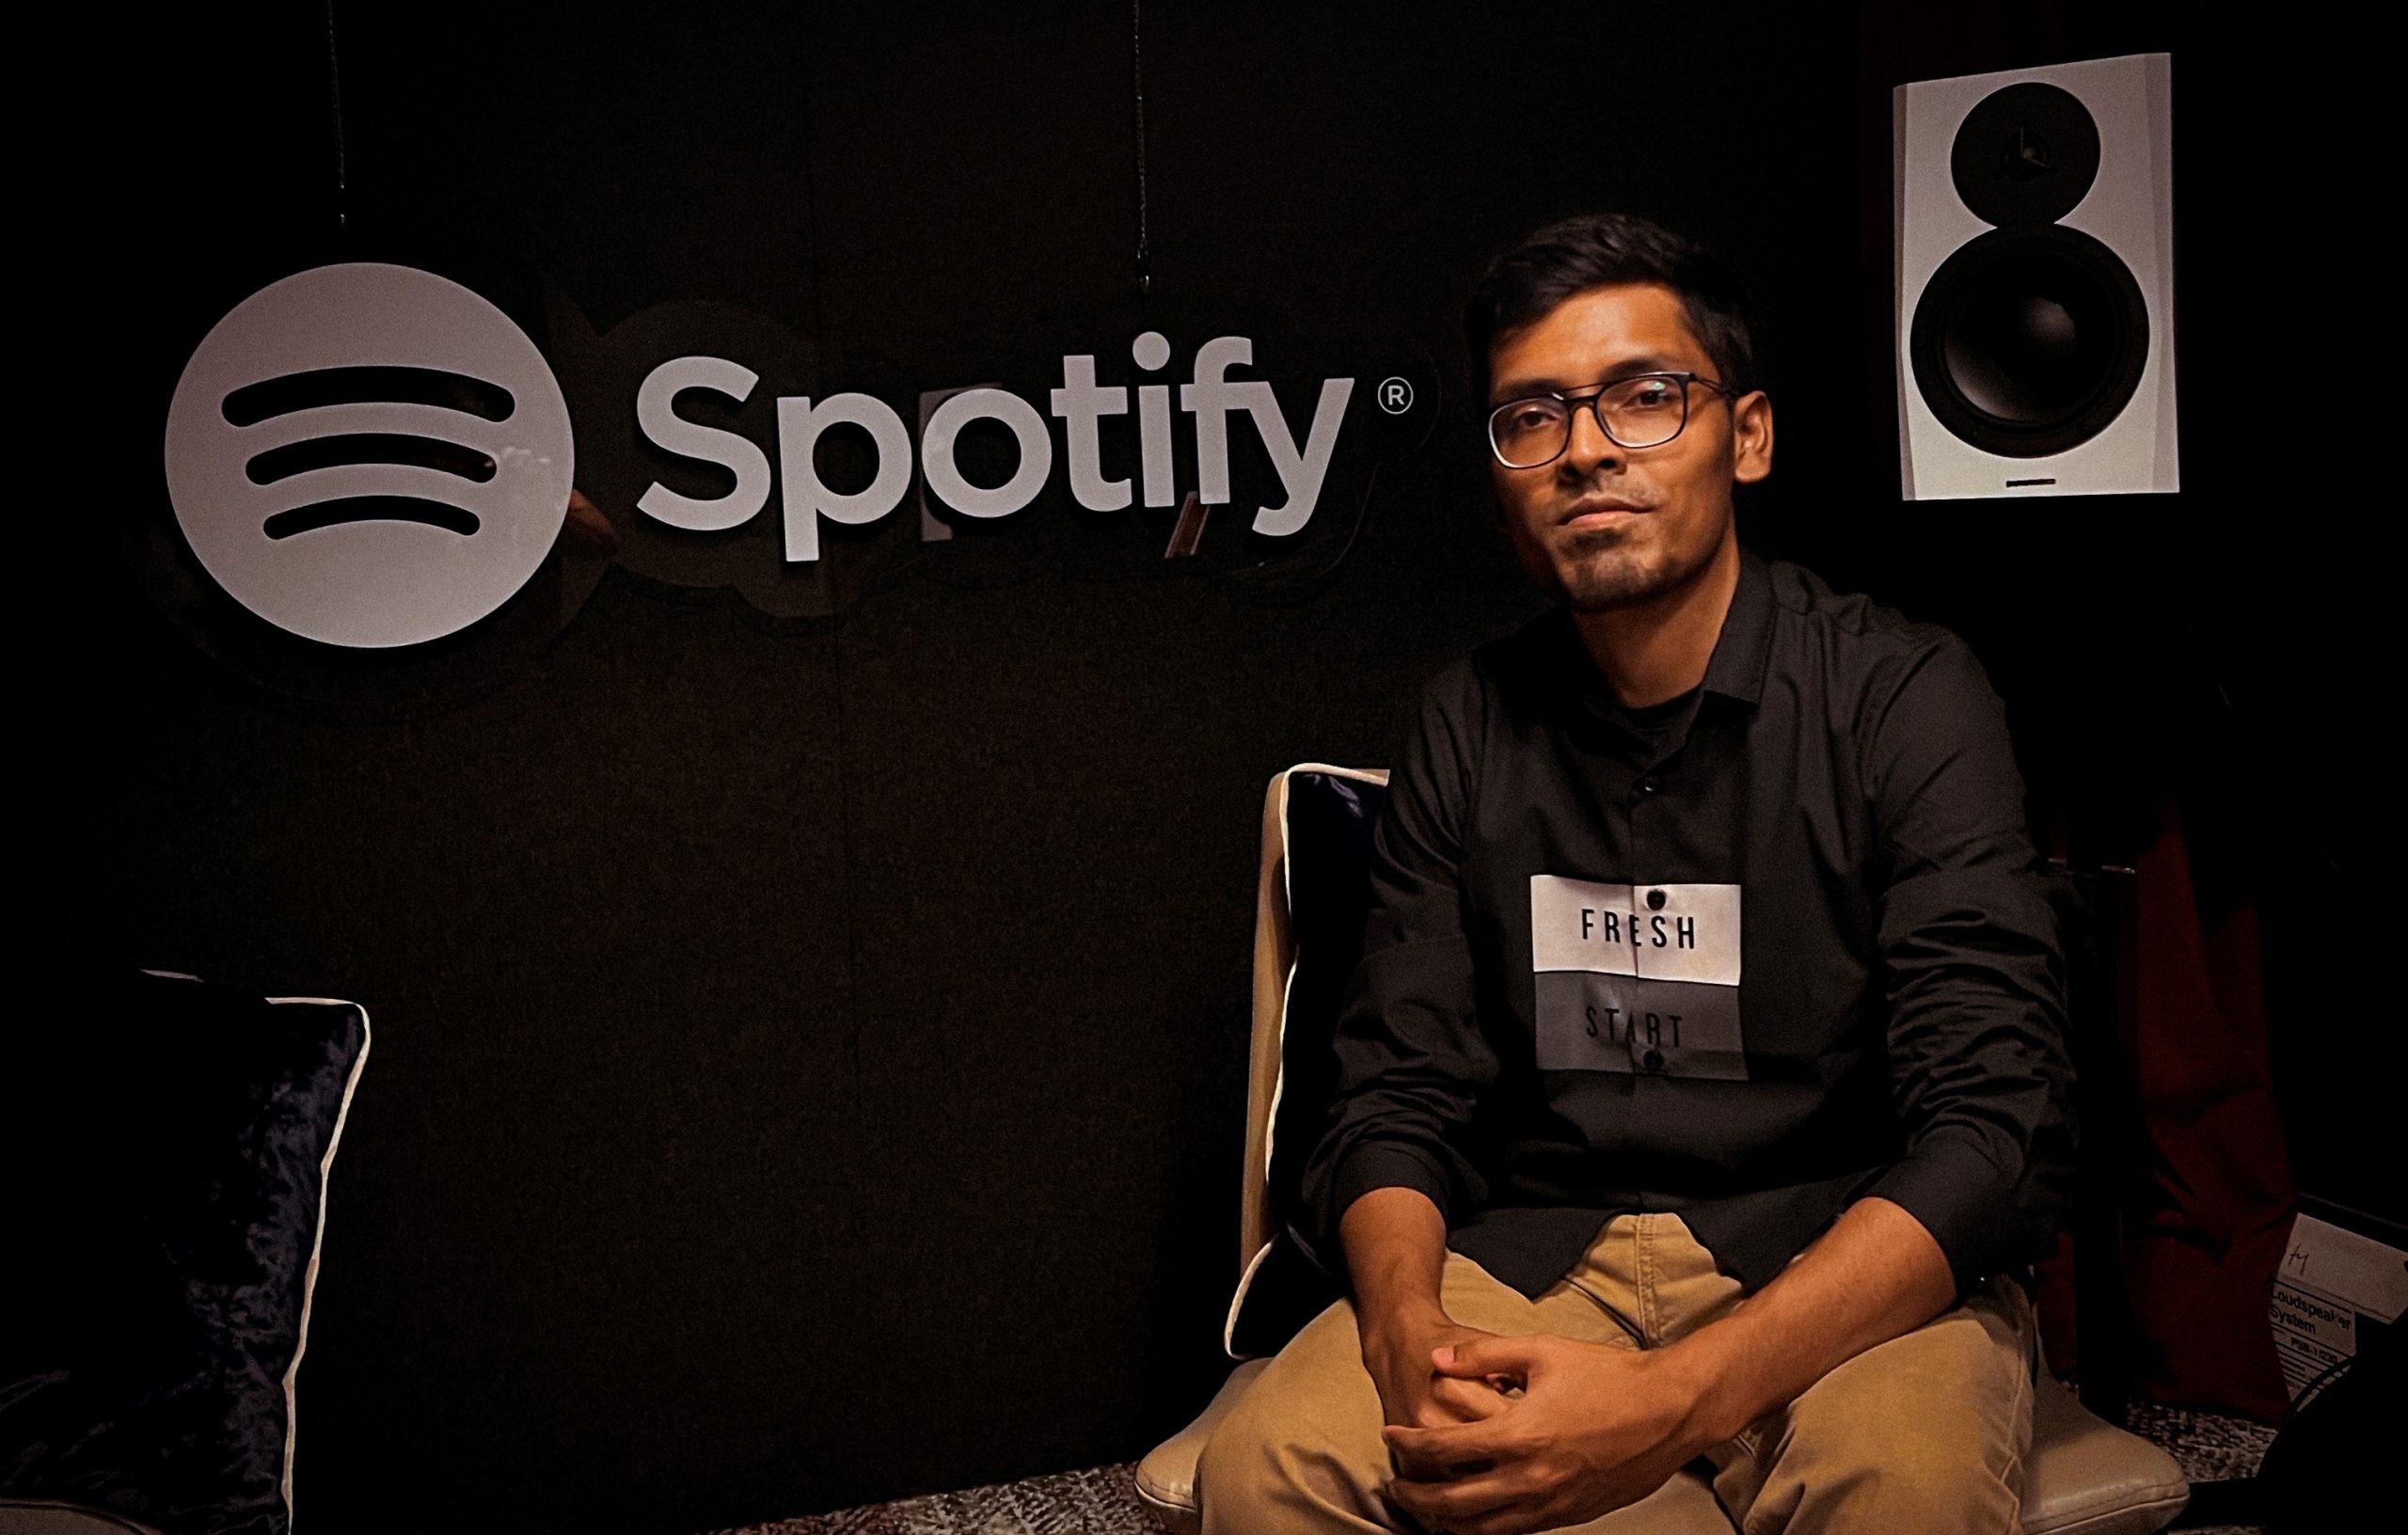 Ekram Professional Gamer to Leading role at Spotify